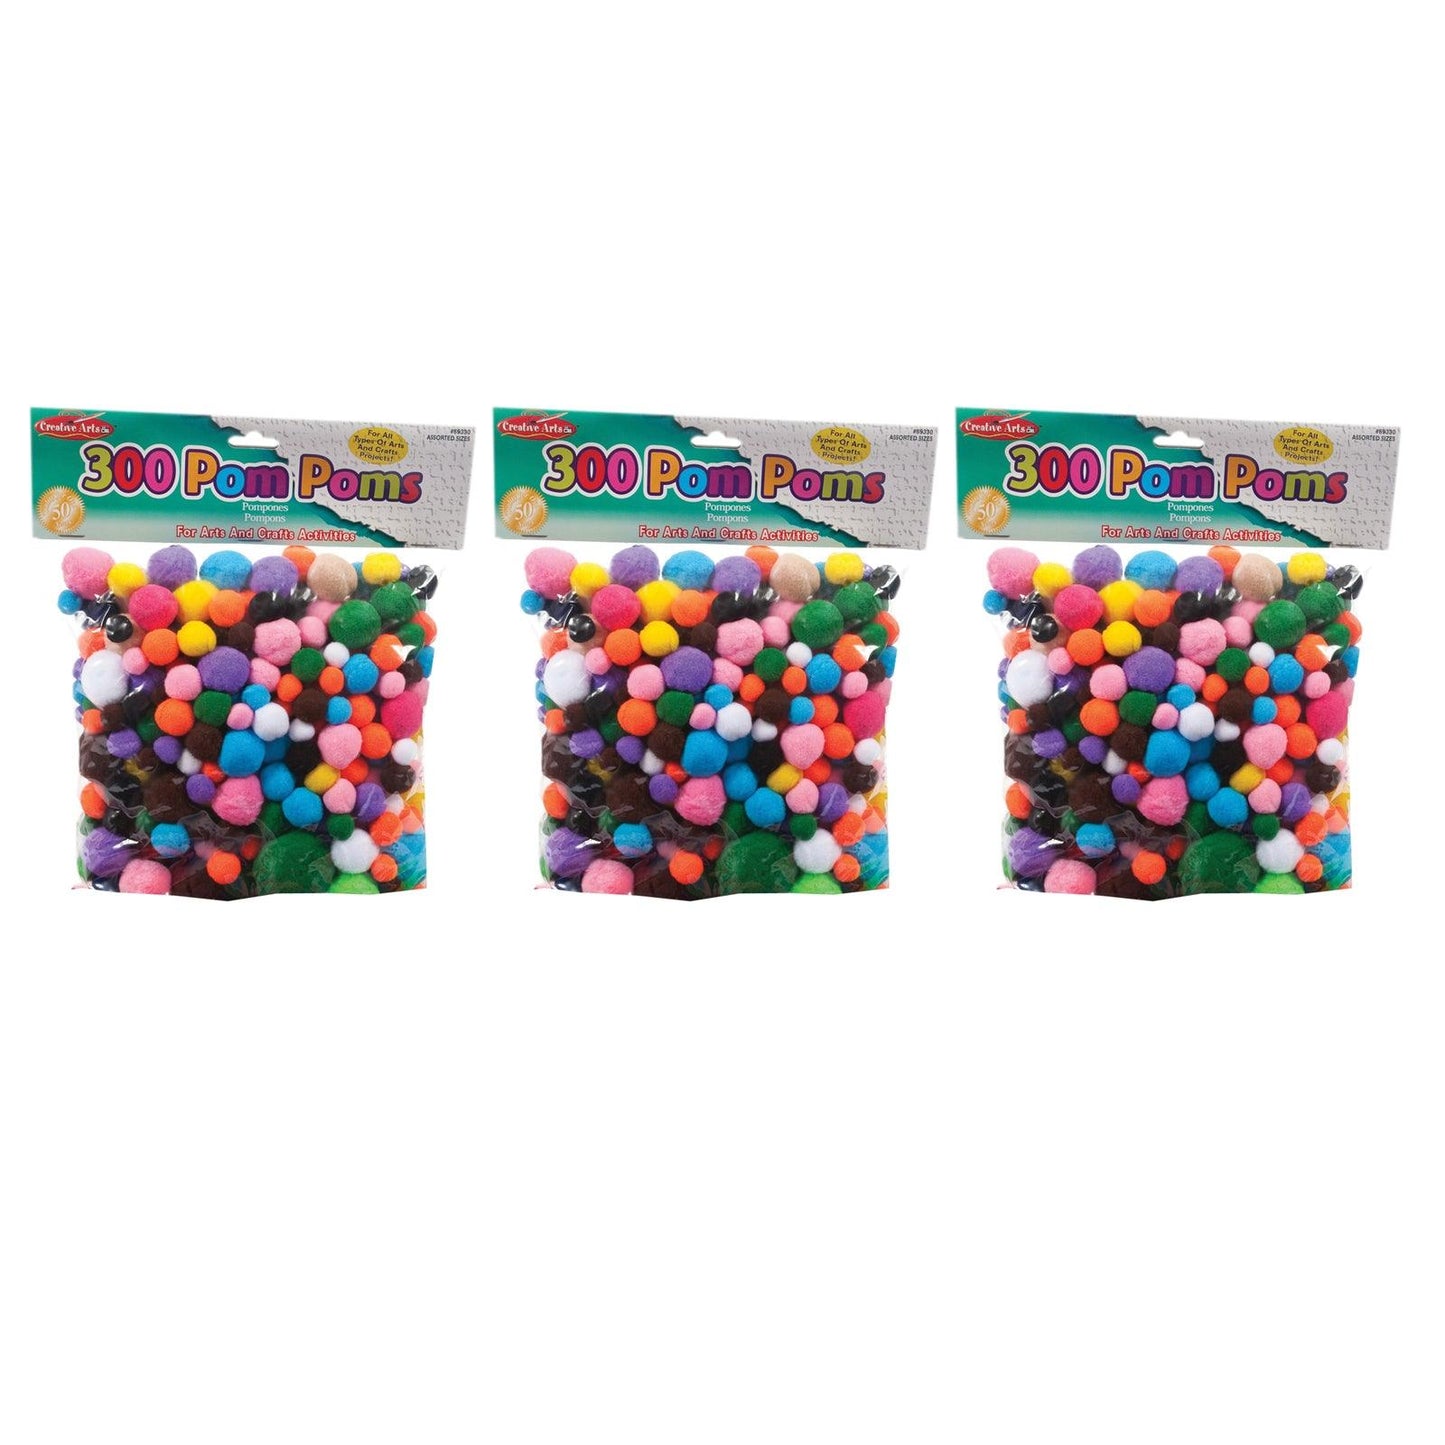 Creative Arts™ Pom-Poms, Assorted Colors/Sizes, 300 Per Pack, 3 Packs - Loomini